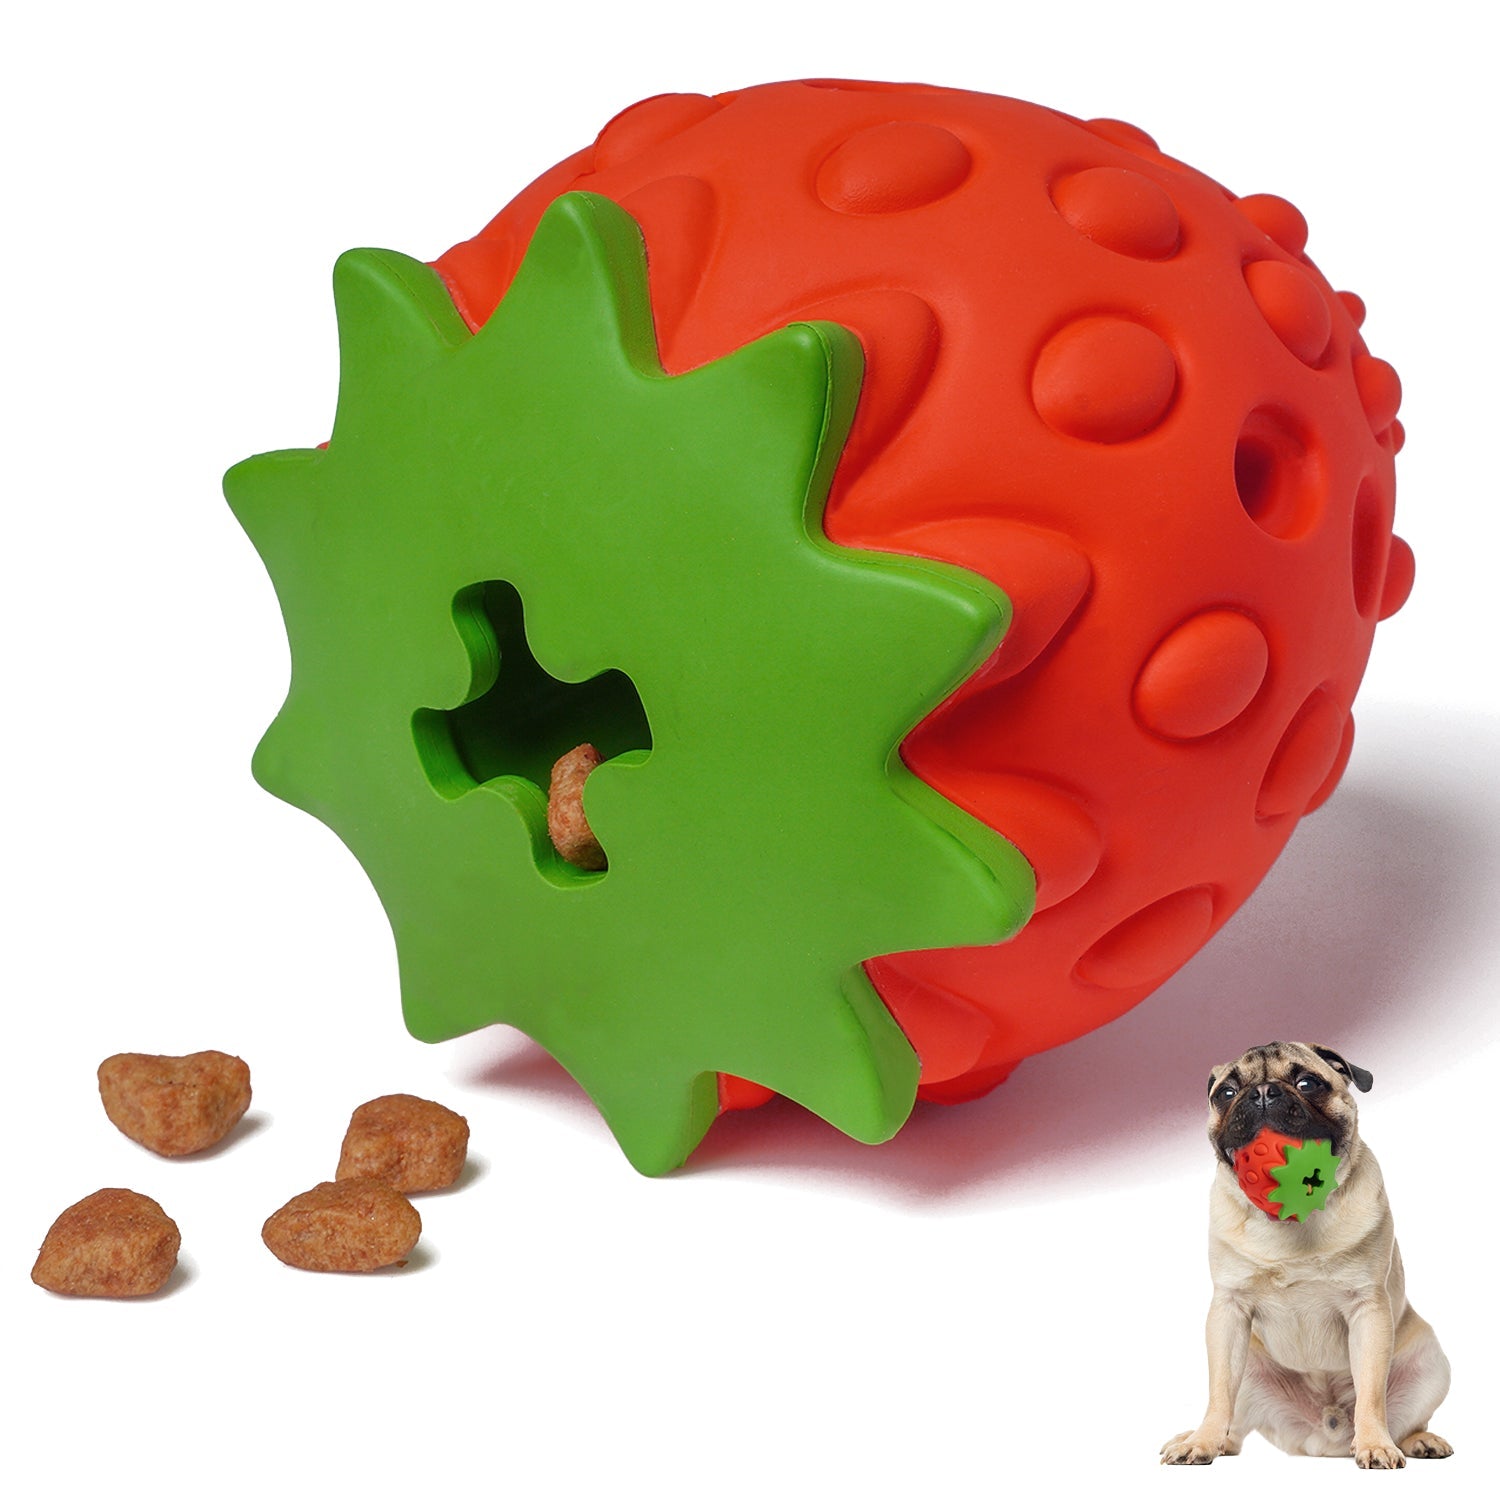 TPR Pet Dog Toy Leaky Food Rubber Indestructible Treat Dispenser